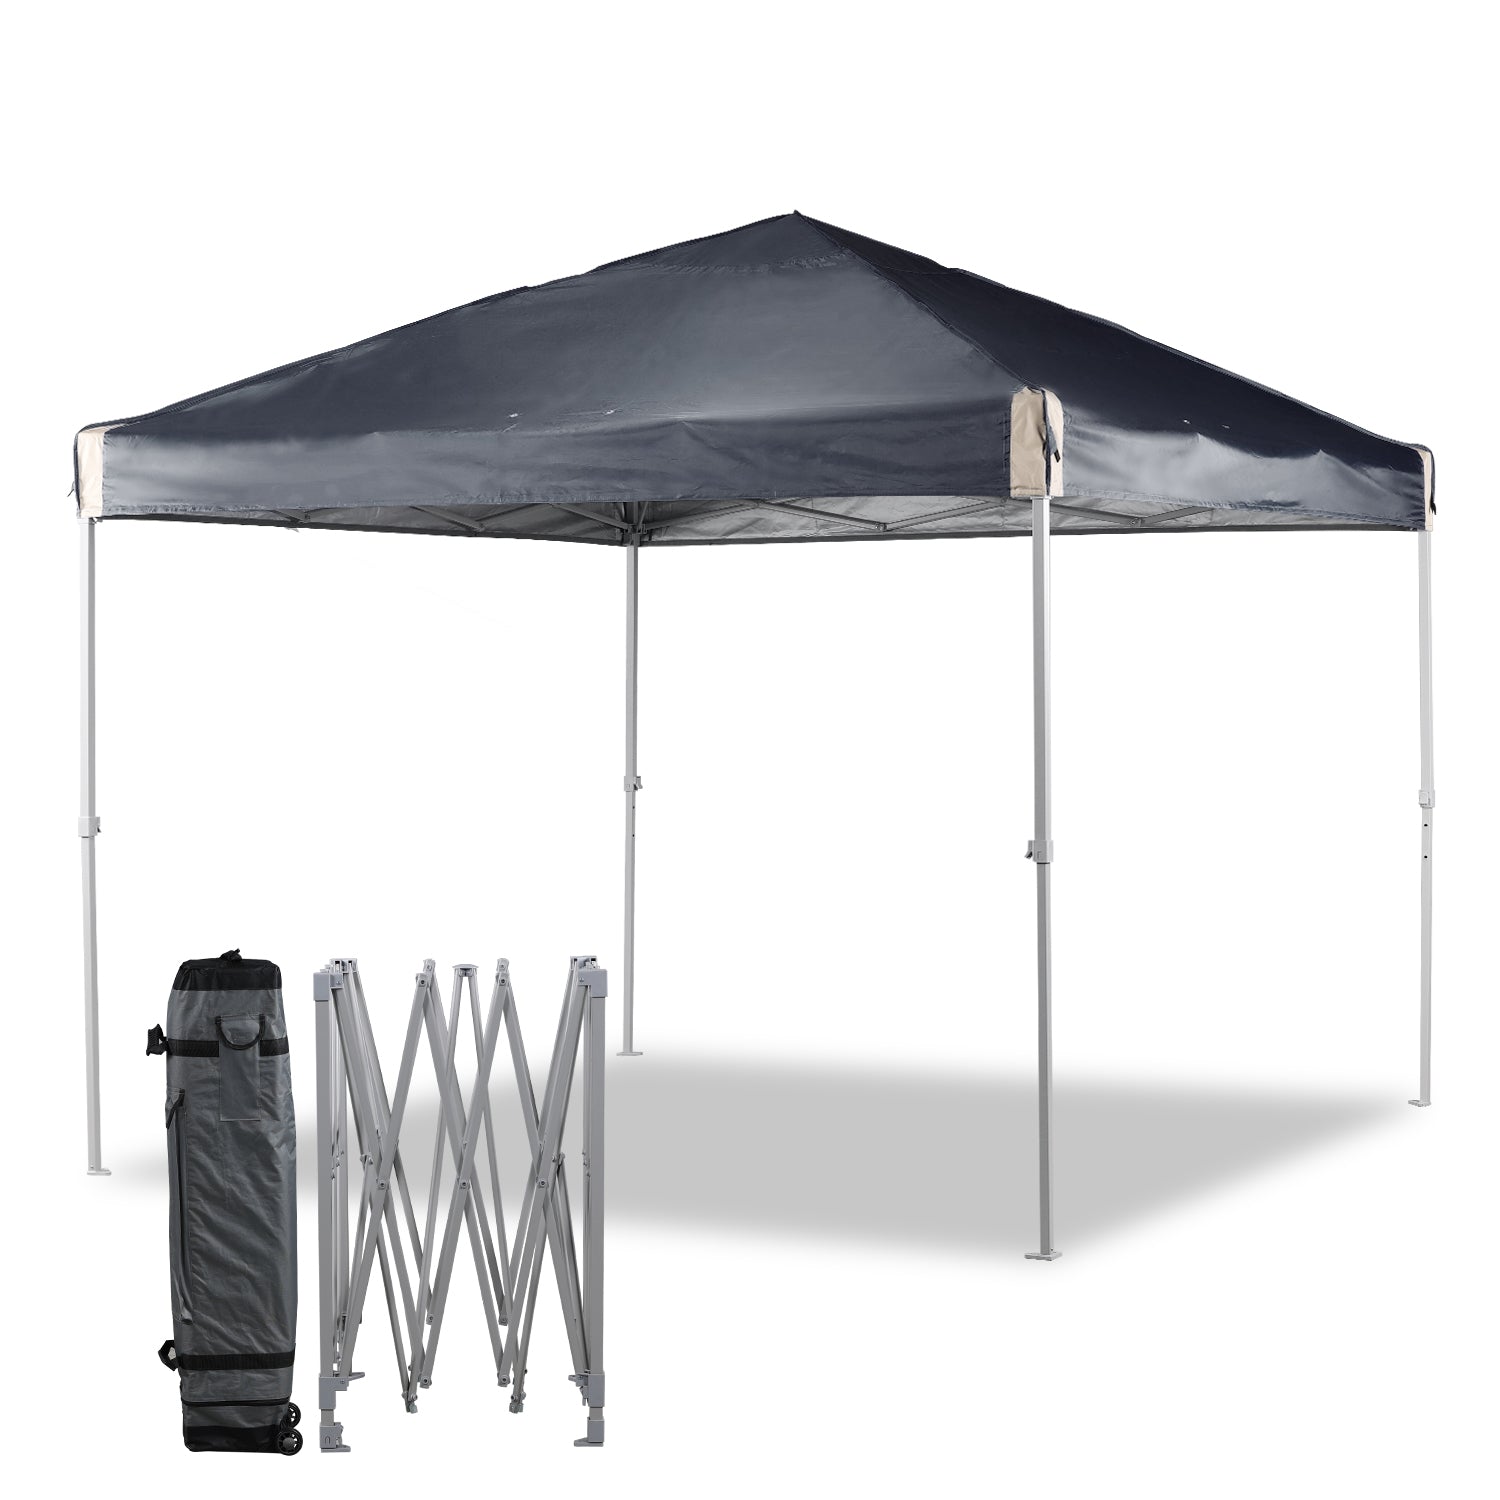 10 x 10 FT Pop Up Canopy Tent with Roller Bag, Instant Shade Canopy Gazebo Aoodor LLC   